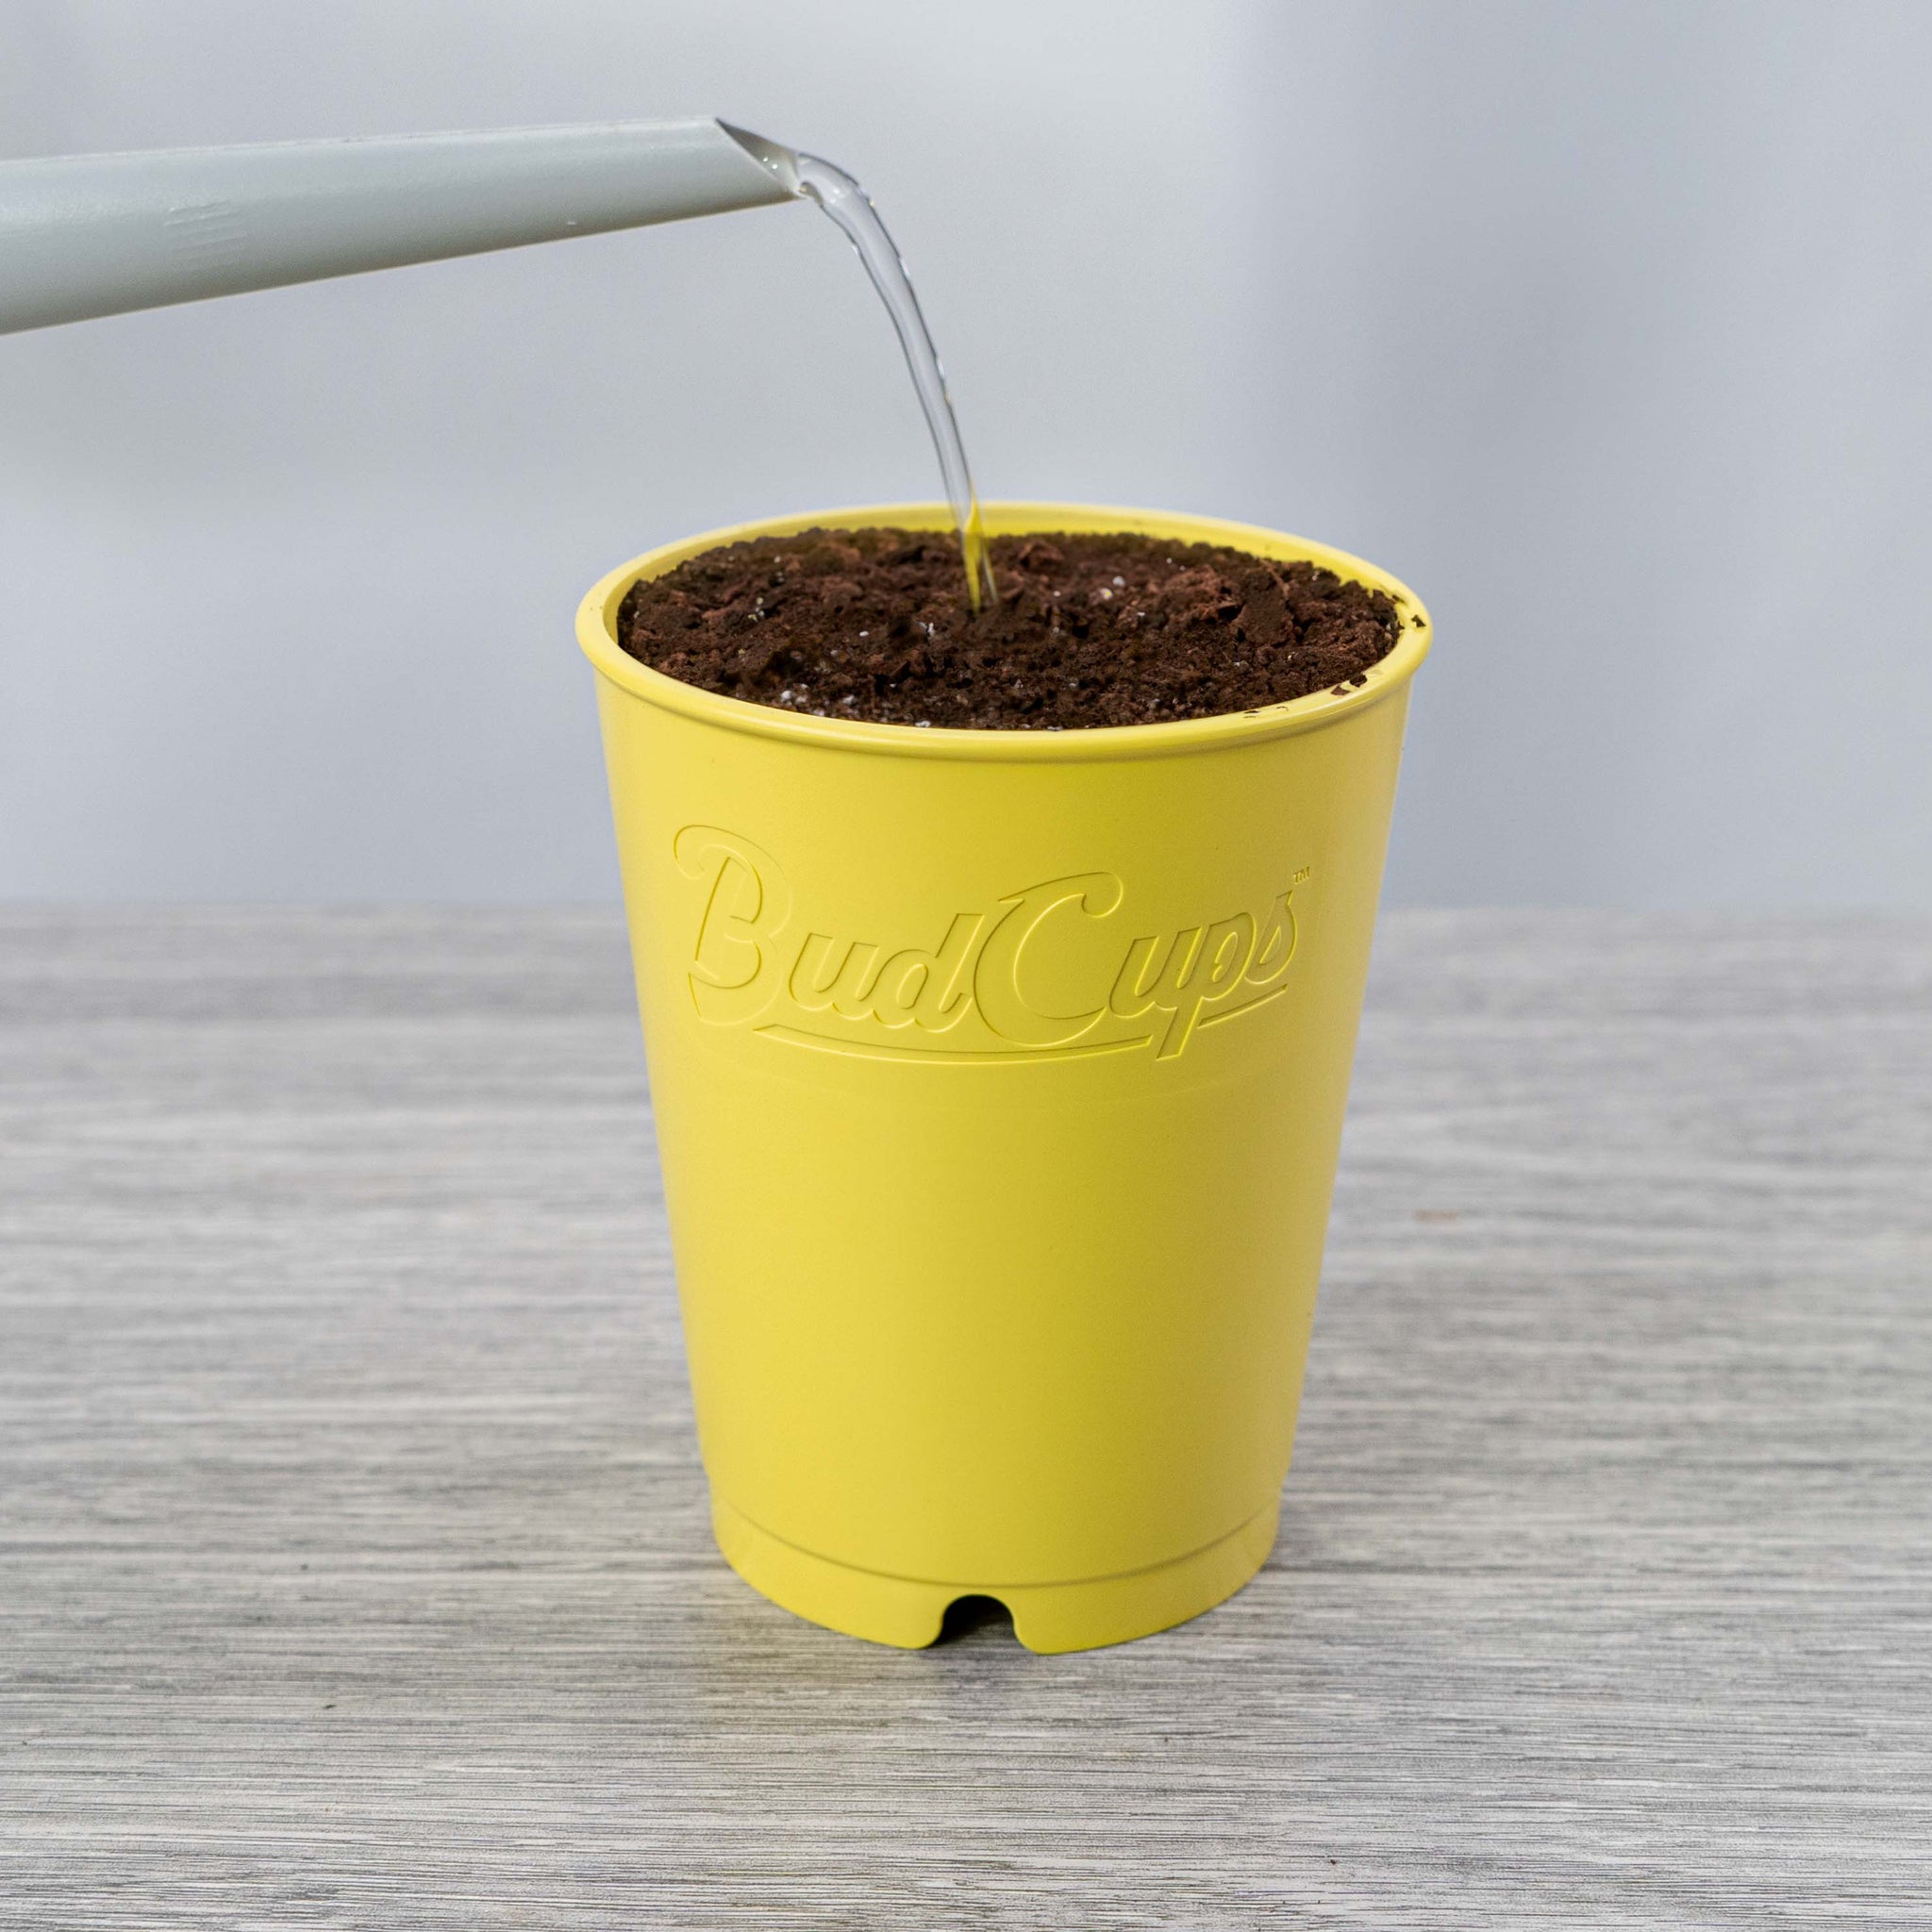 A grey watering can pouring water into a yellow BudCup filled with soil, placed on a grey wood-textured surface against a soft white background.